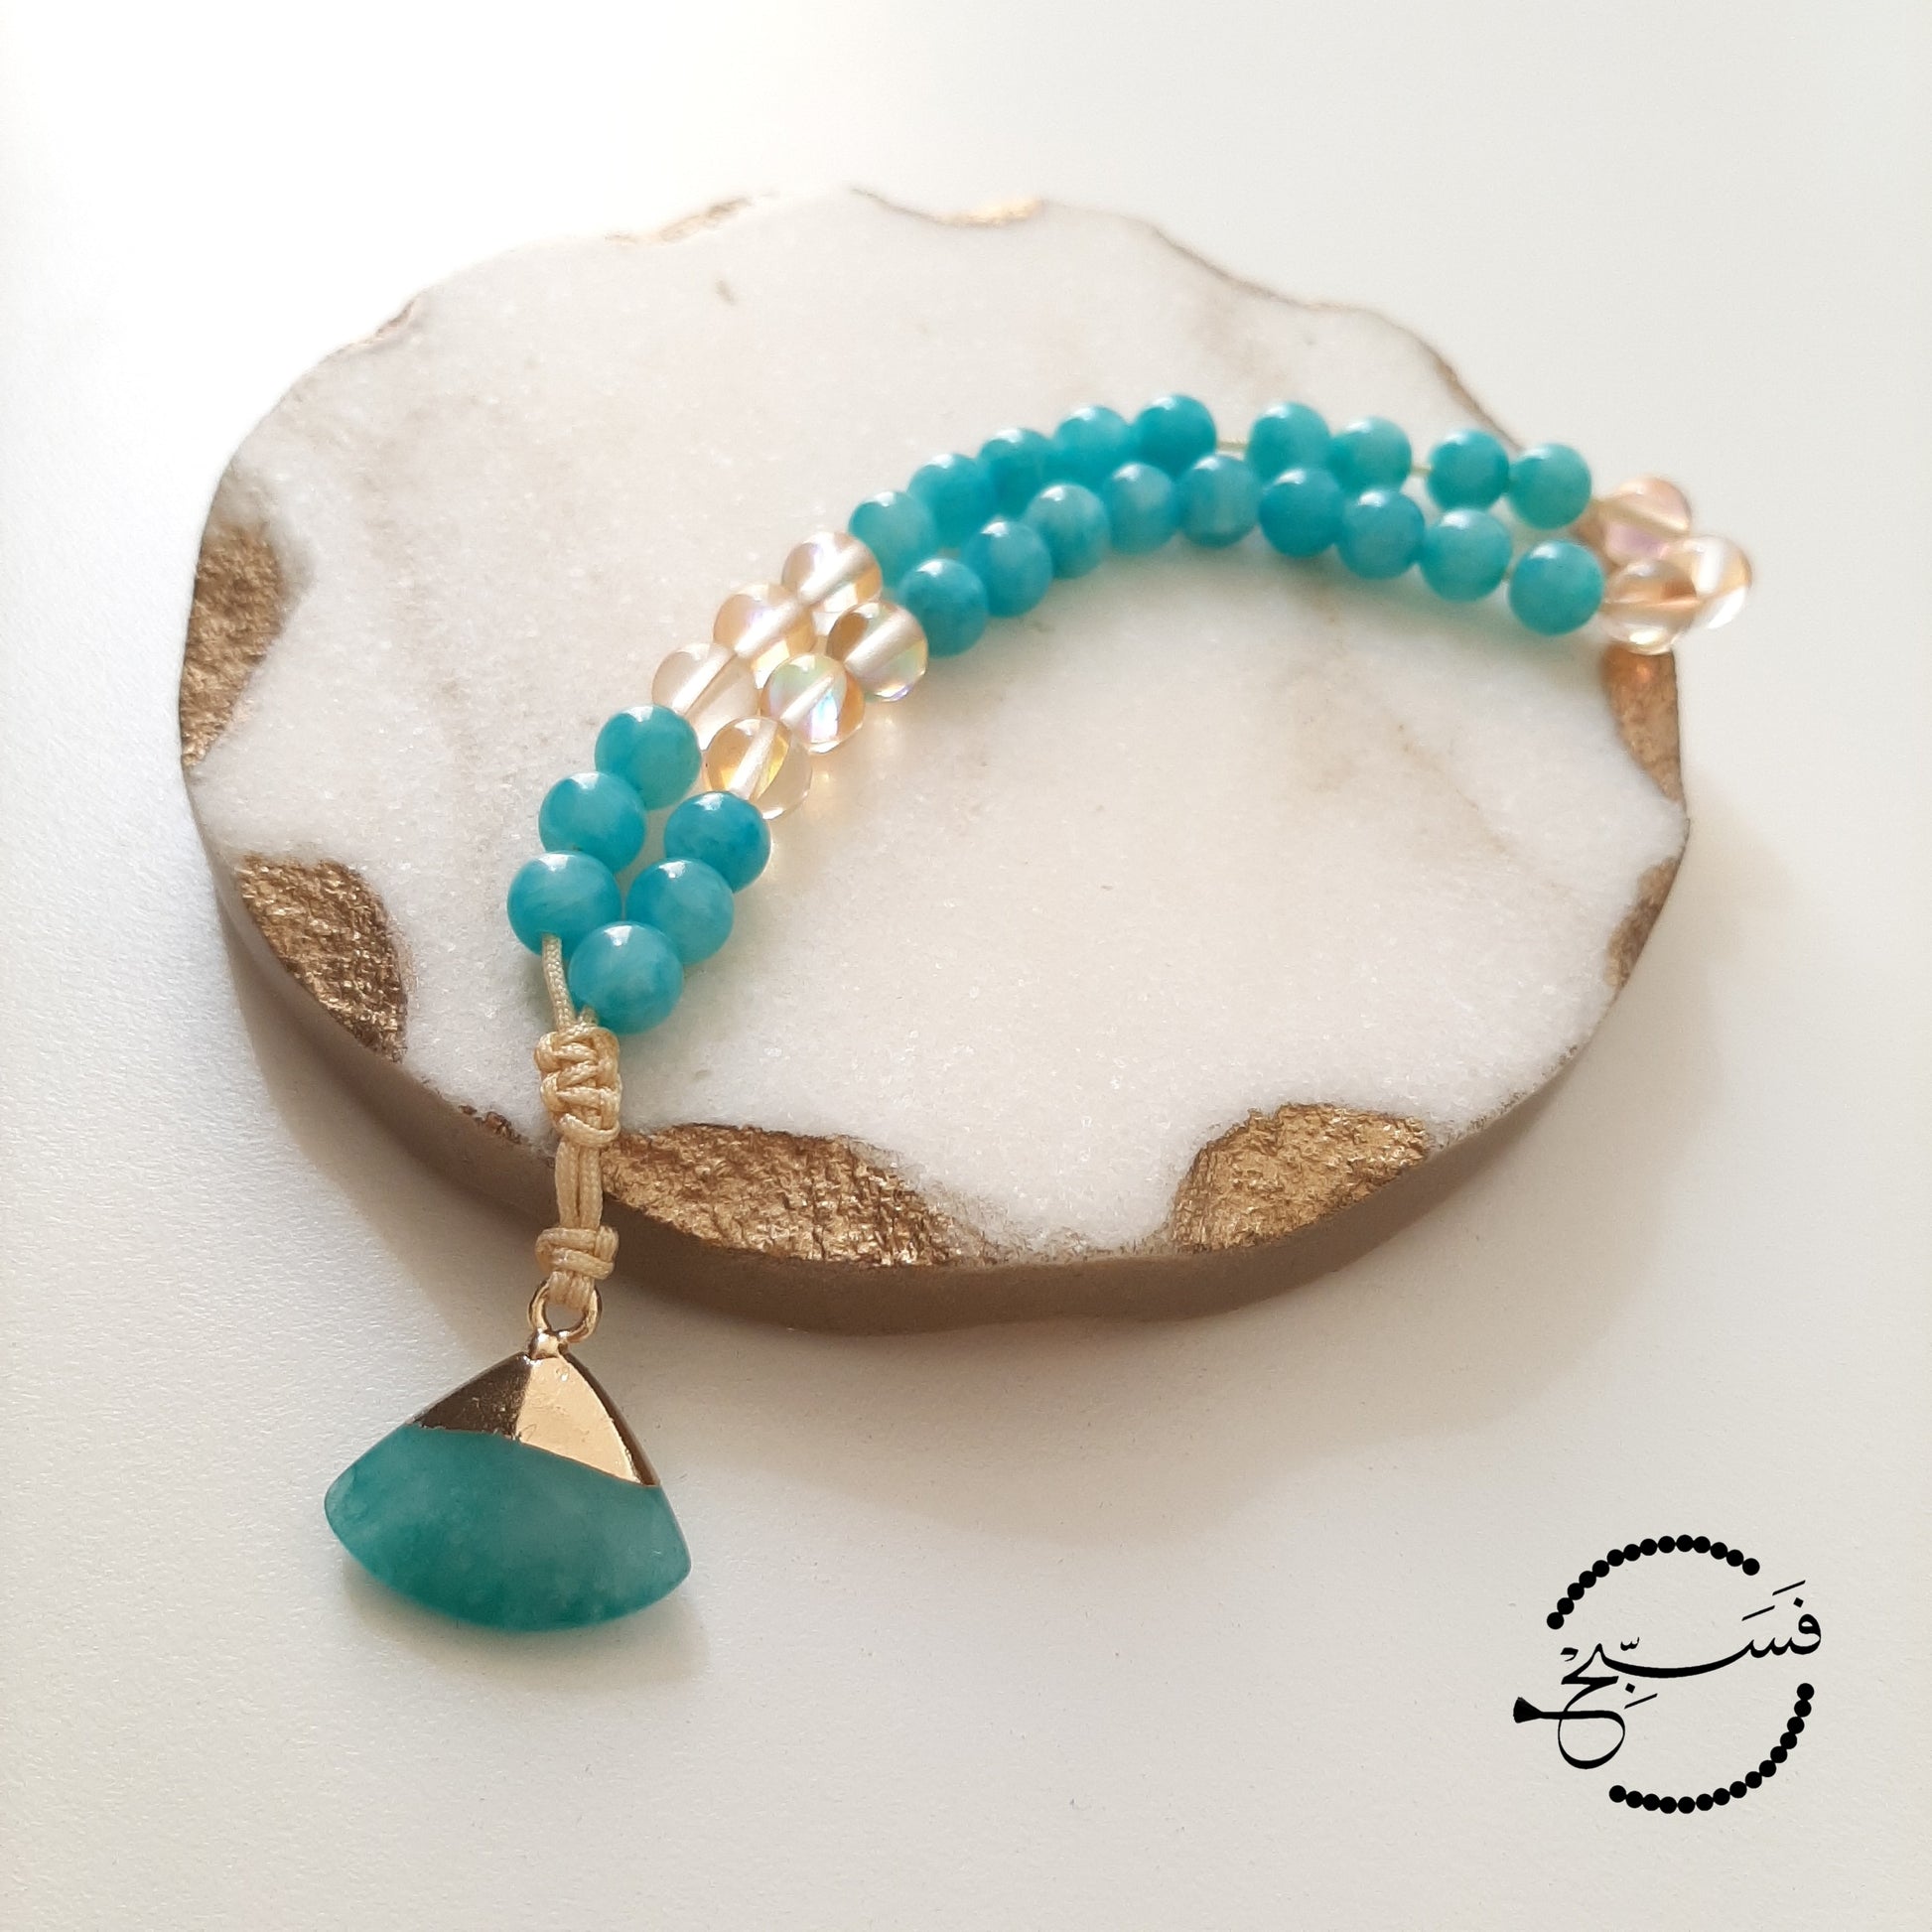 Natural amazonite with gold moonstone beads and a quartz pendant.  Features an adjustable knot.  33 beads (6mm beads)